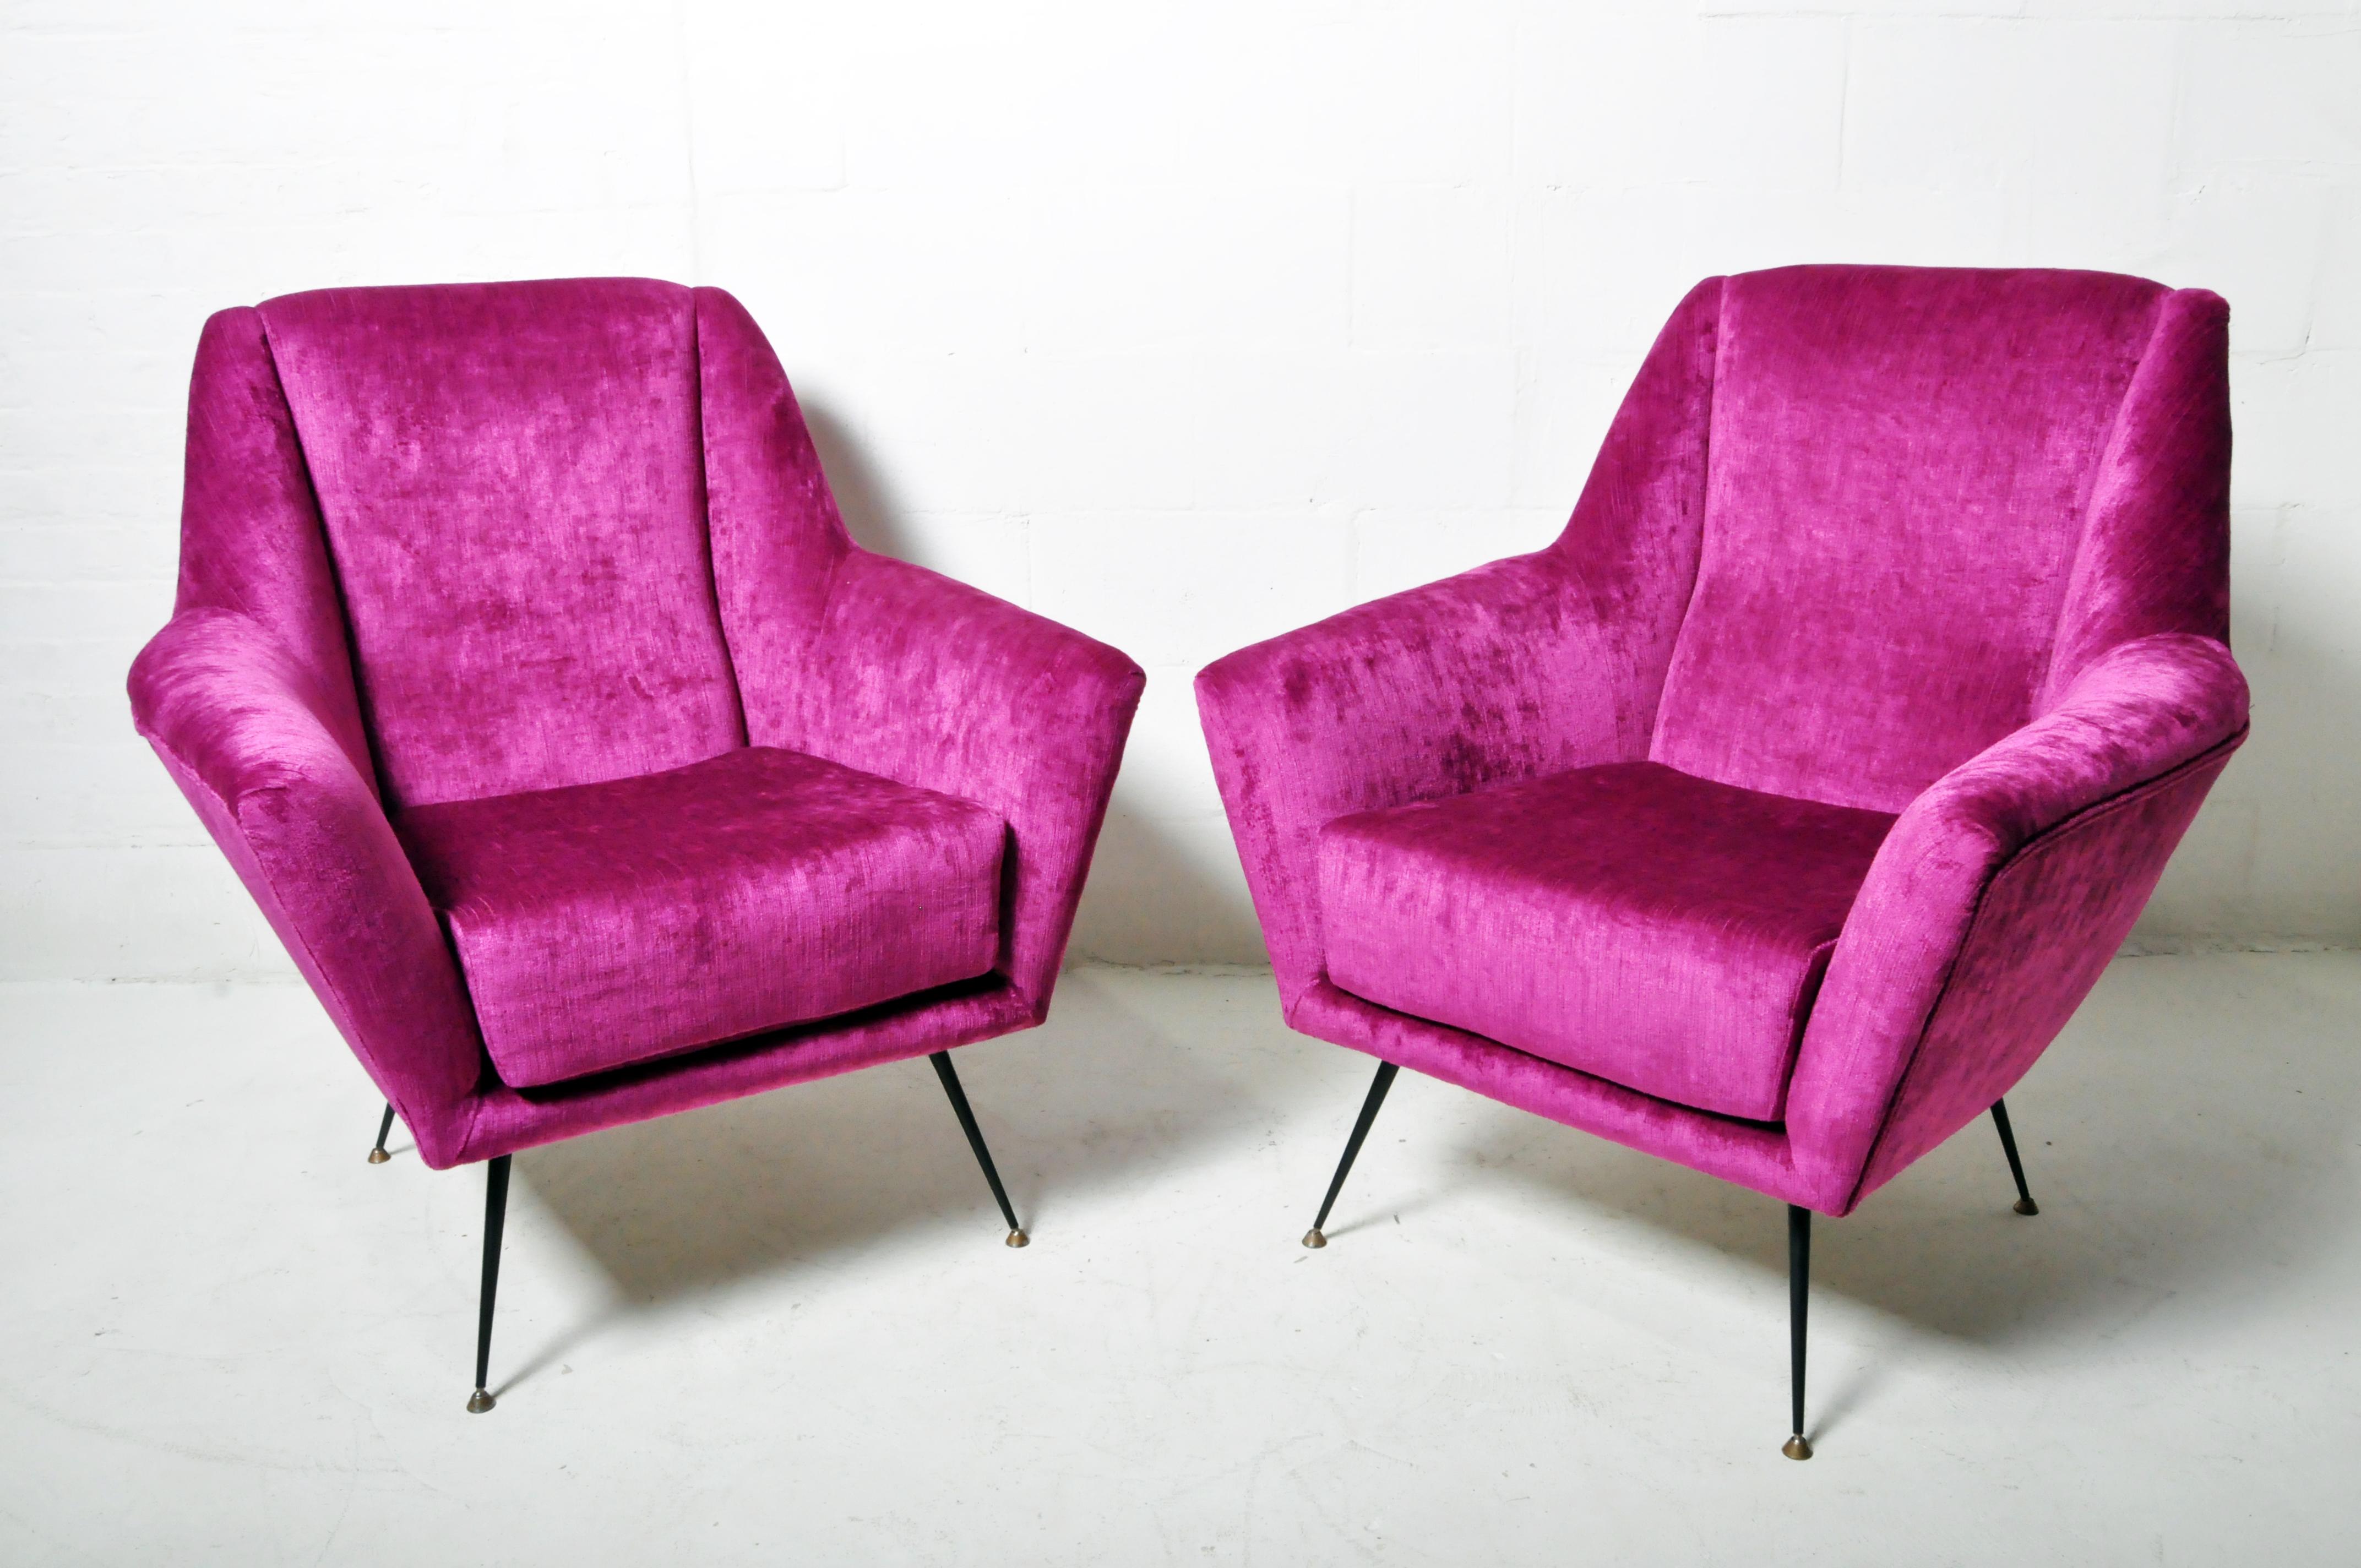 These elegant mid-century lounge chairs feature angular lines, very slim steel legs and crushed velvet upholstery. These are vintage Italian pieces that have been fully rebuilt and restored in Hungary.